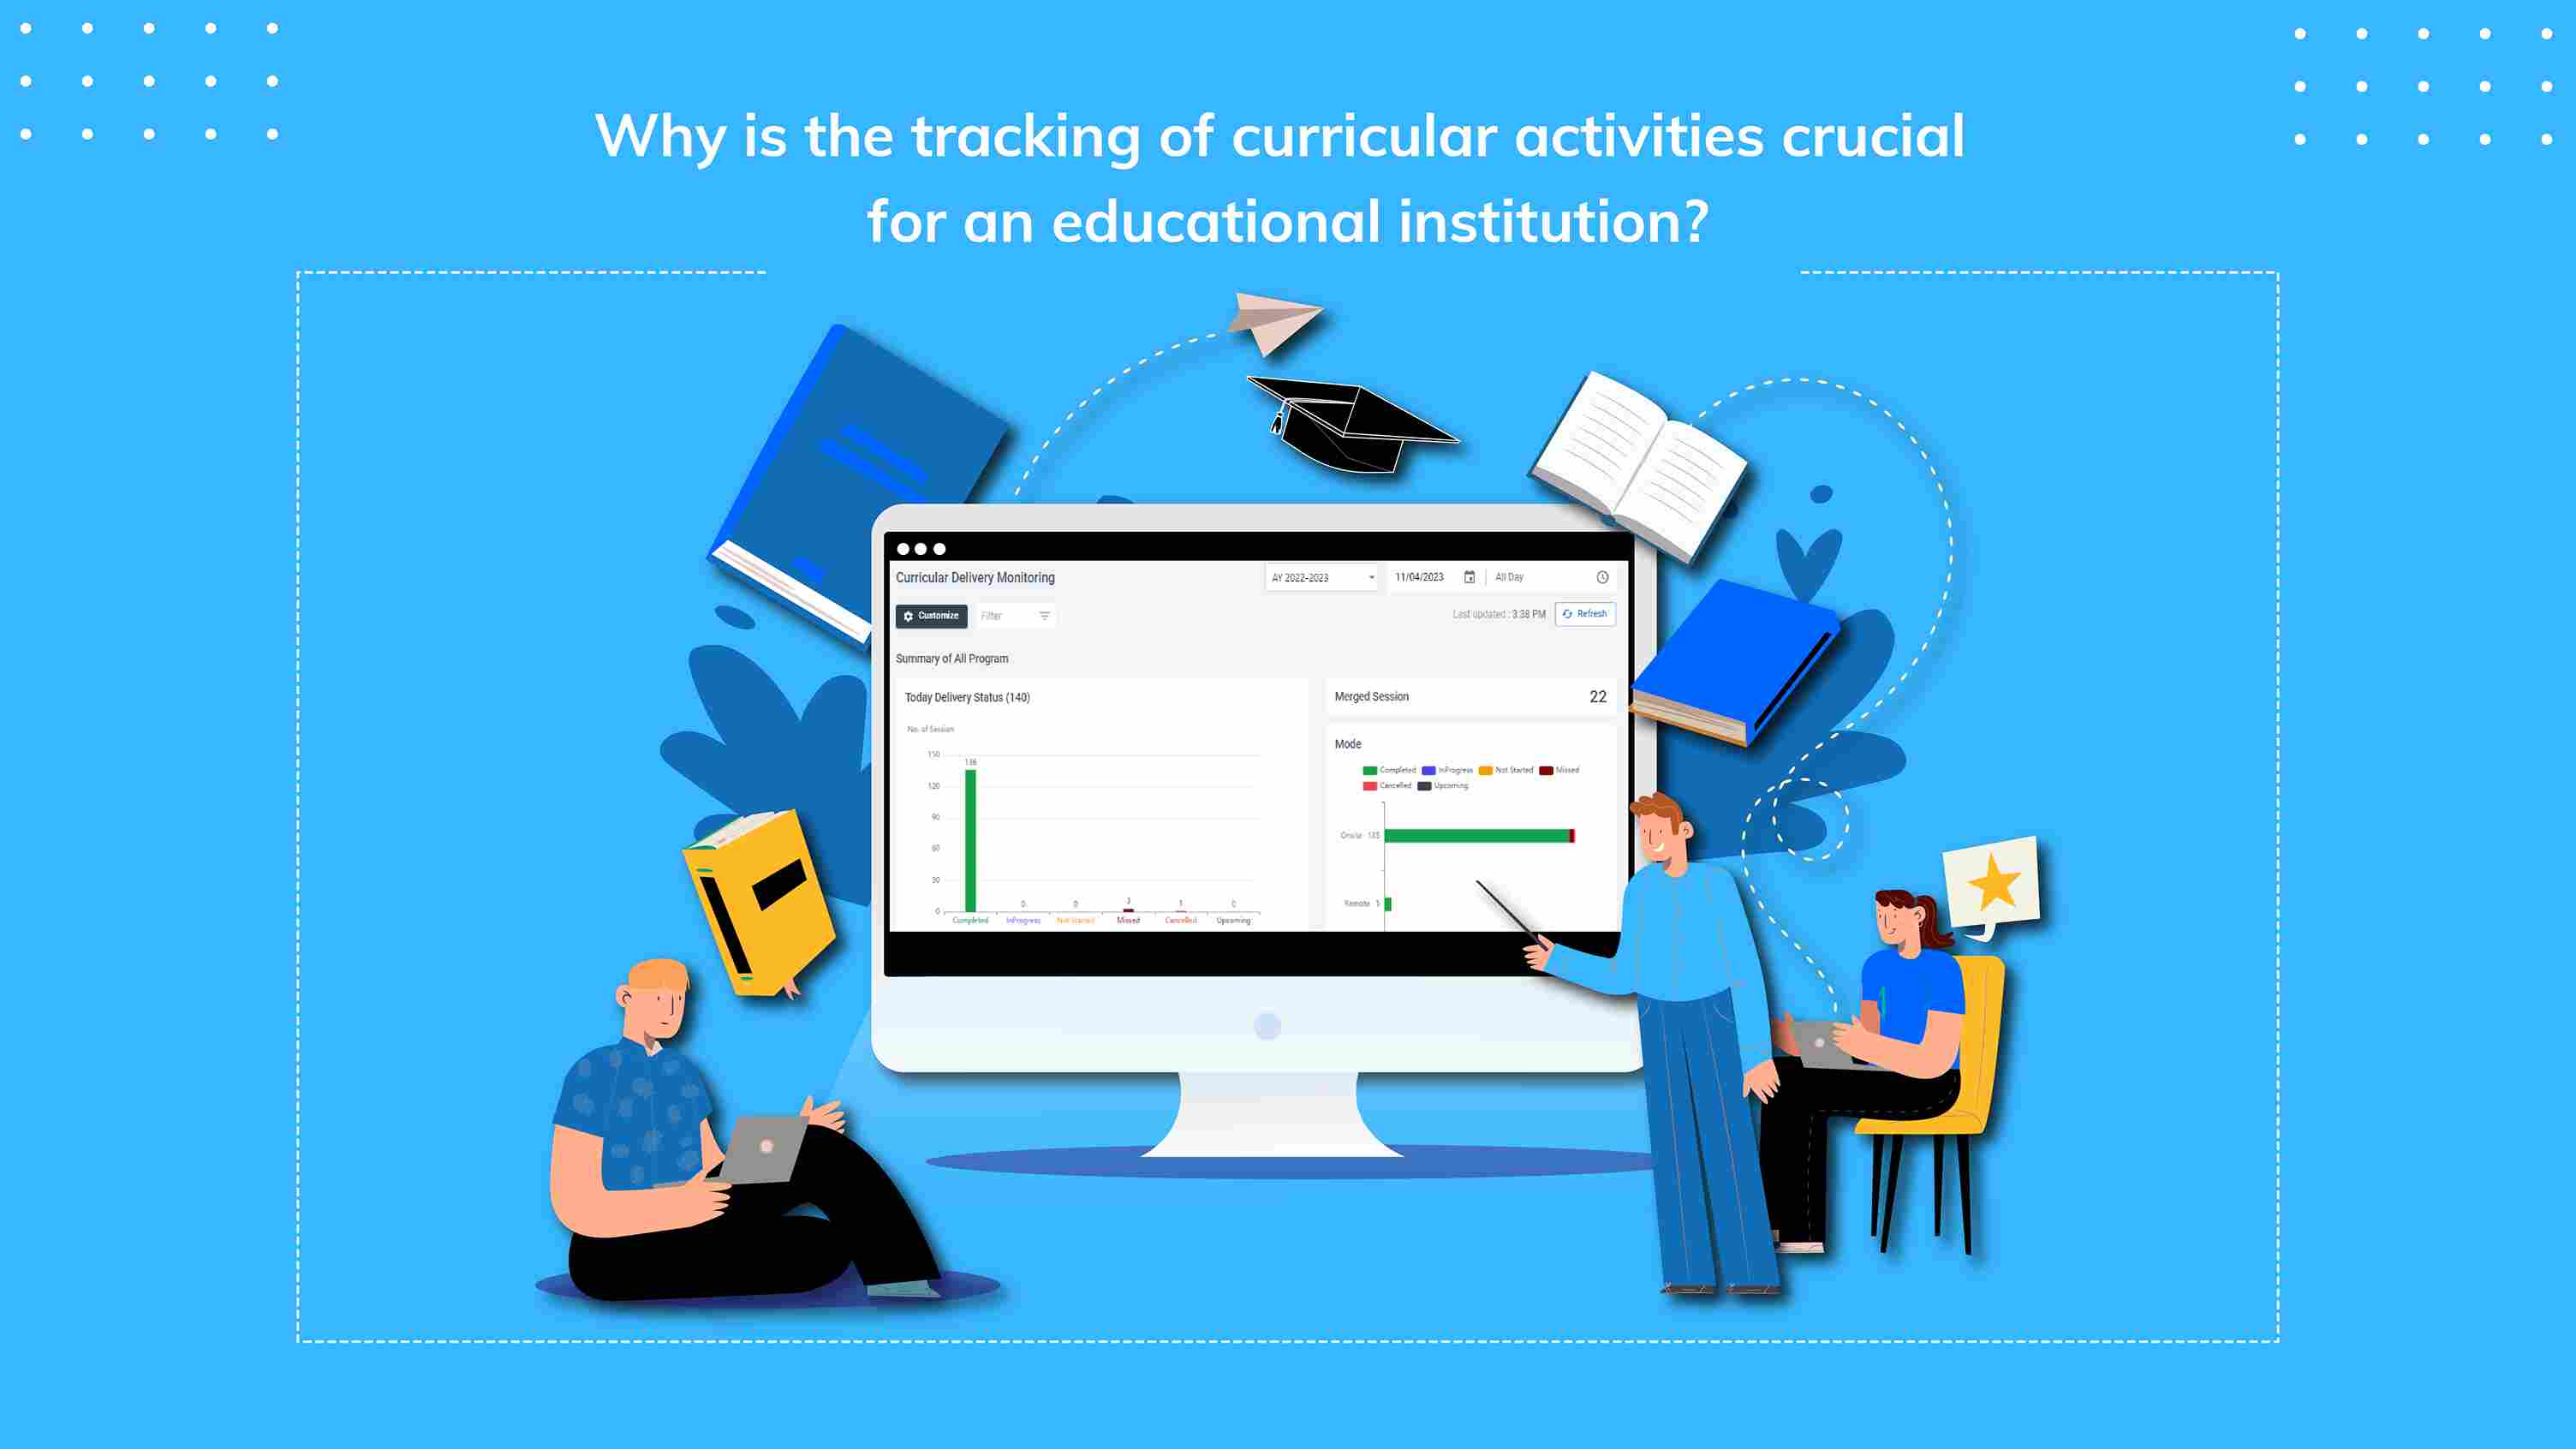 Digital Assessment Solutions, Digital Classroom Solutions, Digital eLearning Solution, Digital Learning Solution, Digital Scheduling Solution, Digital Scheduling System, Modern Education School,Higher Education eLearning, Learning Management Solutions, Online Assessment Platform ,Why is the tracking of curricular activities crucial for an educational institution?